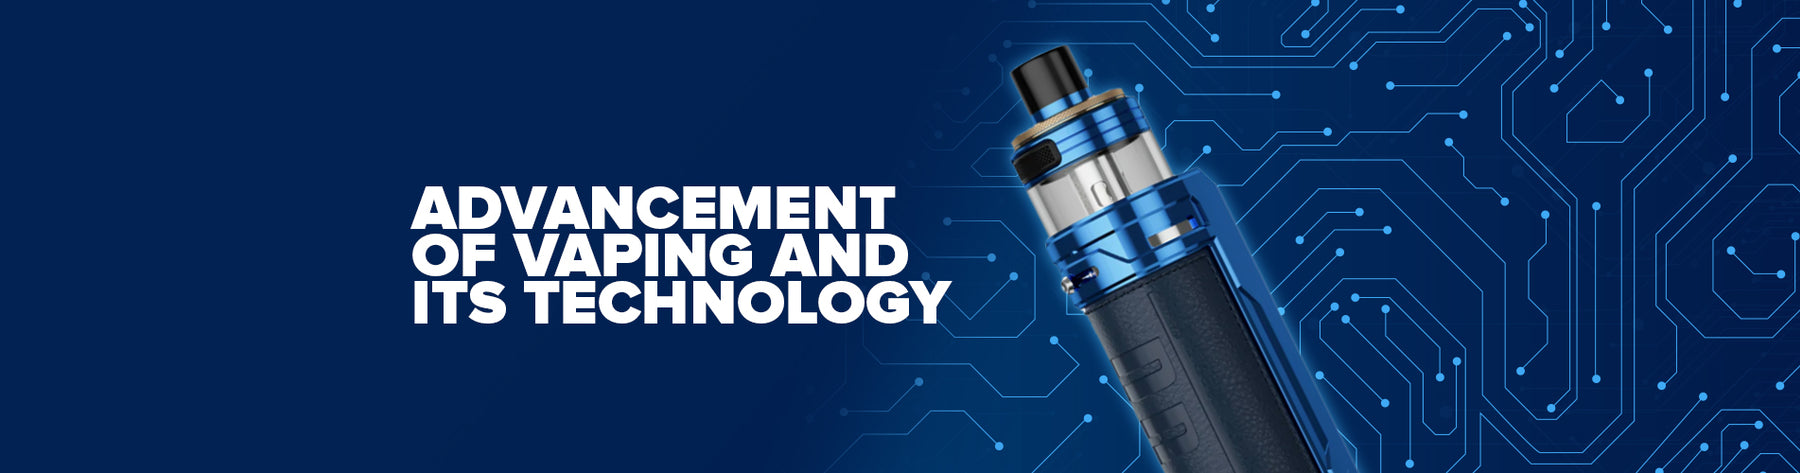 Advancement Of Vaping And Its Technology